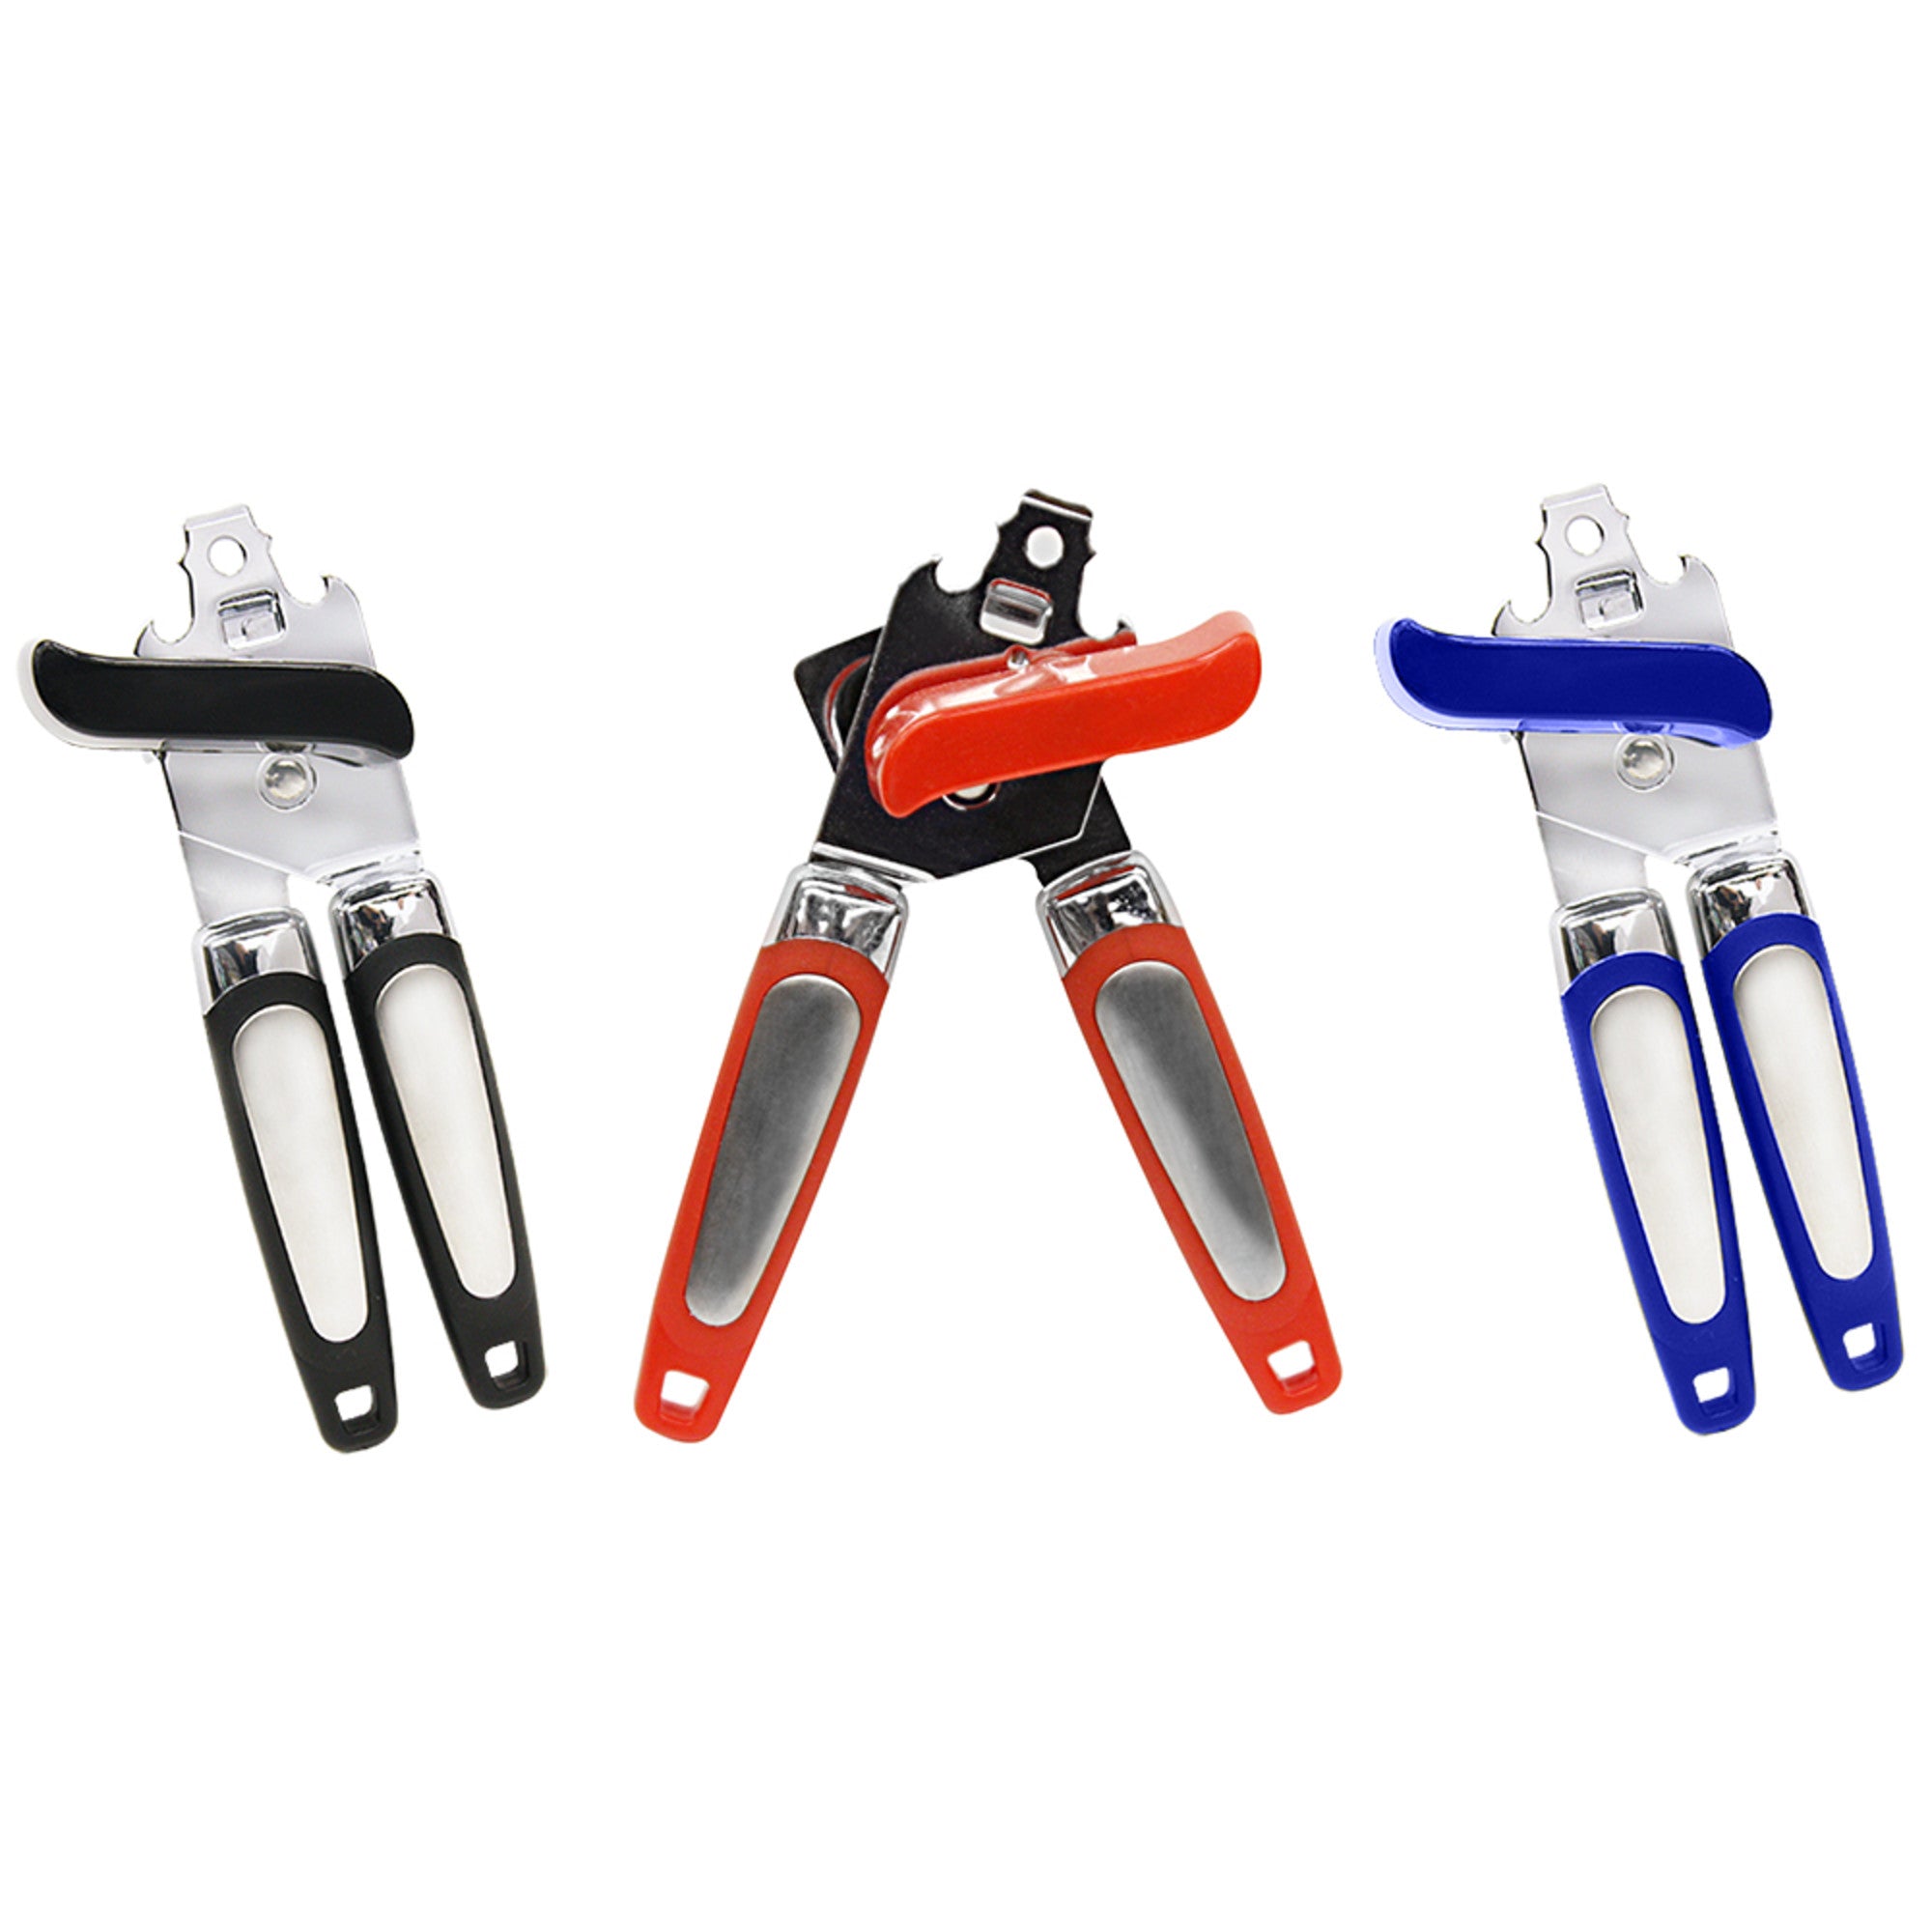 Home Basics Can Opener - Assorted Colors